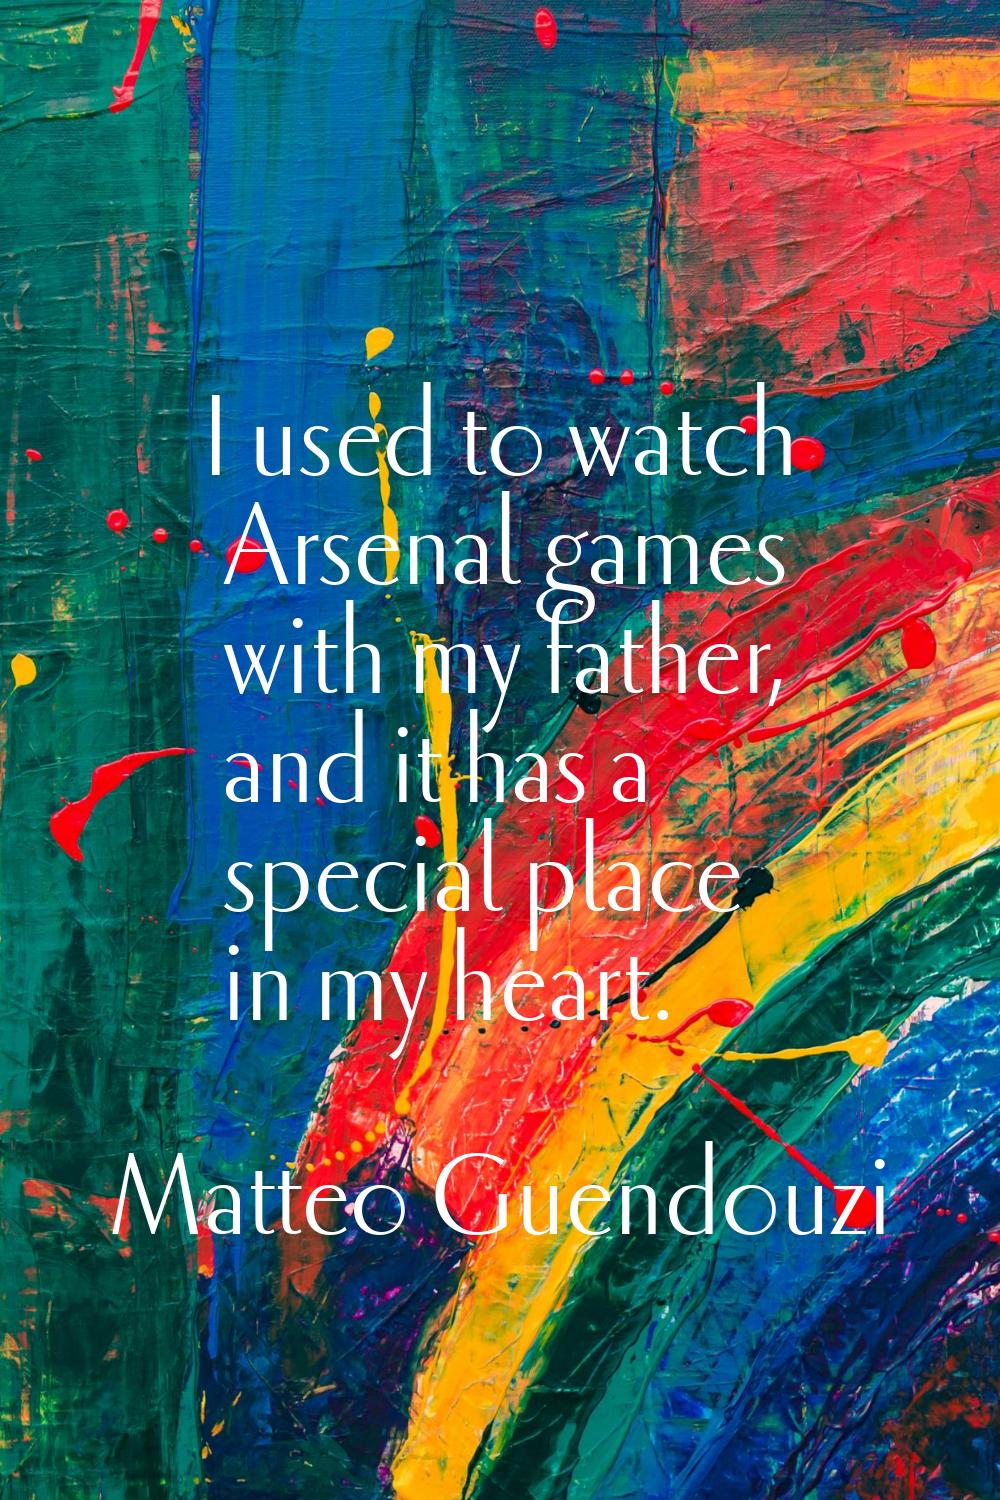 I used to watch Arsenal games with my father, and it has a special place in my heart.